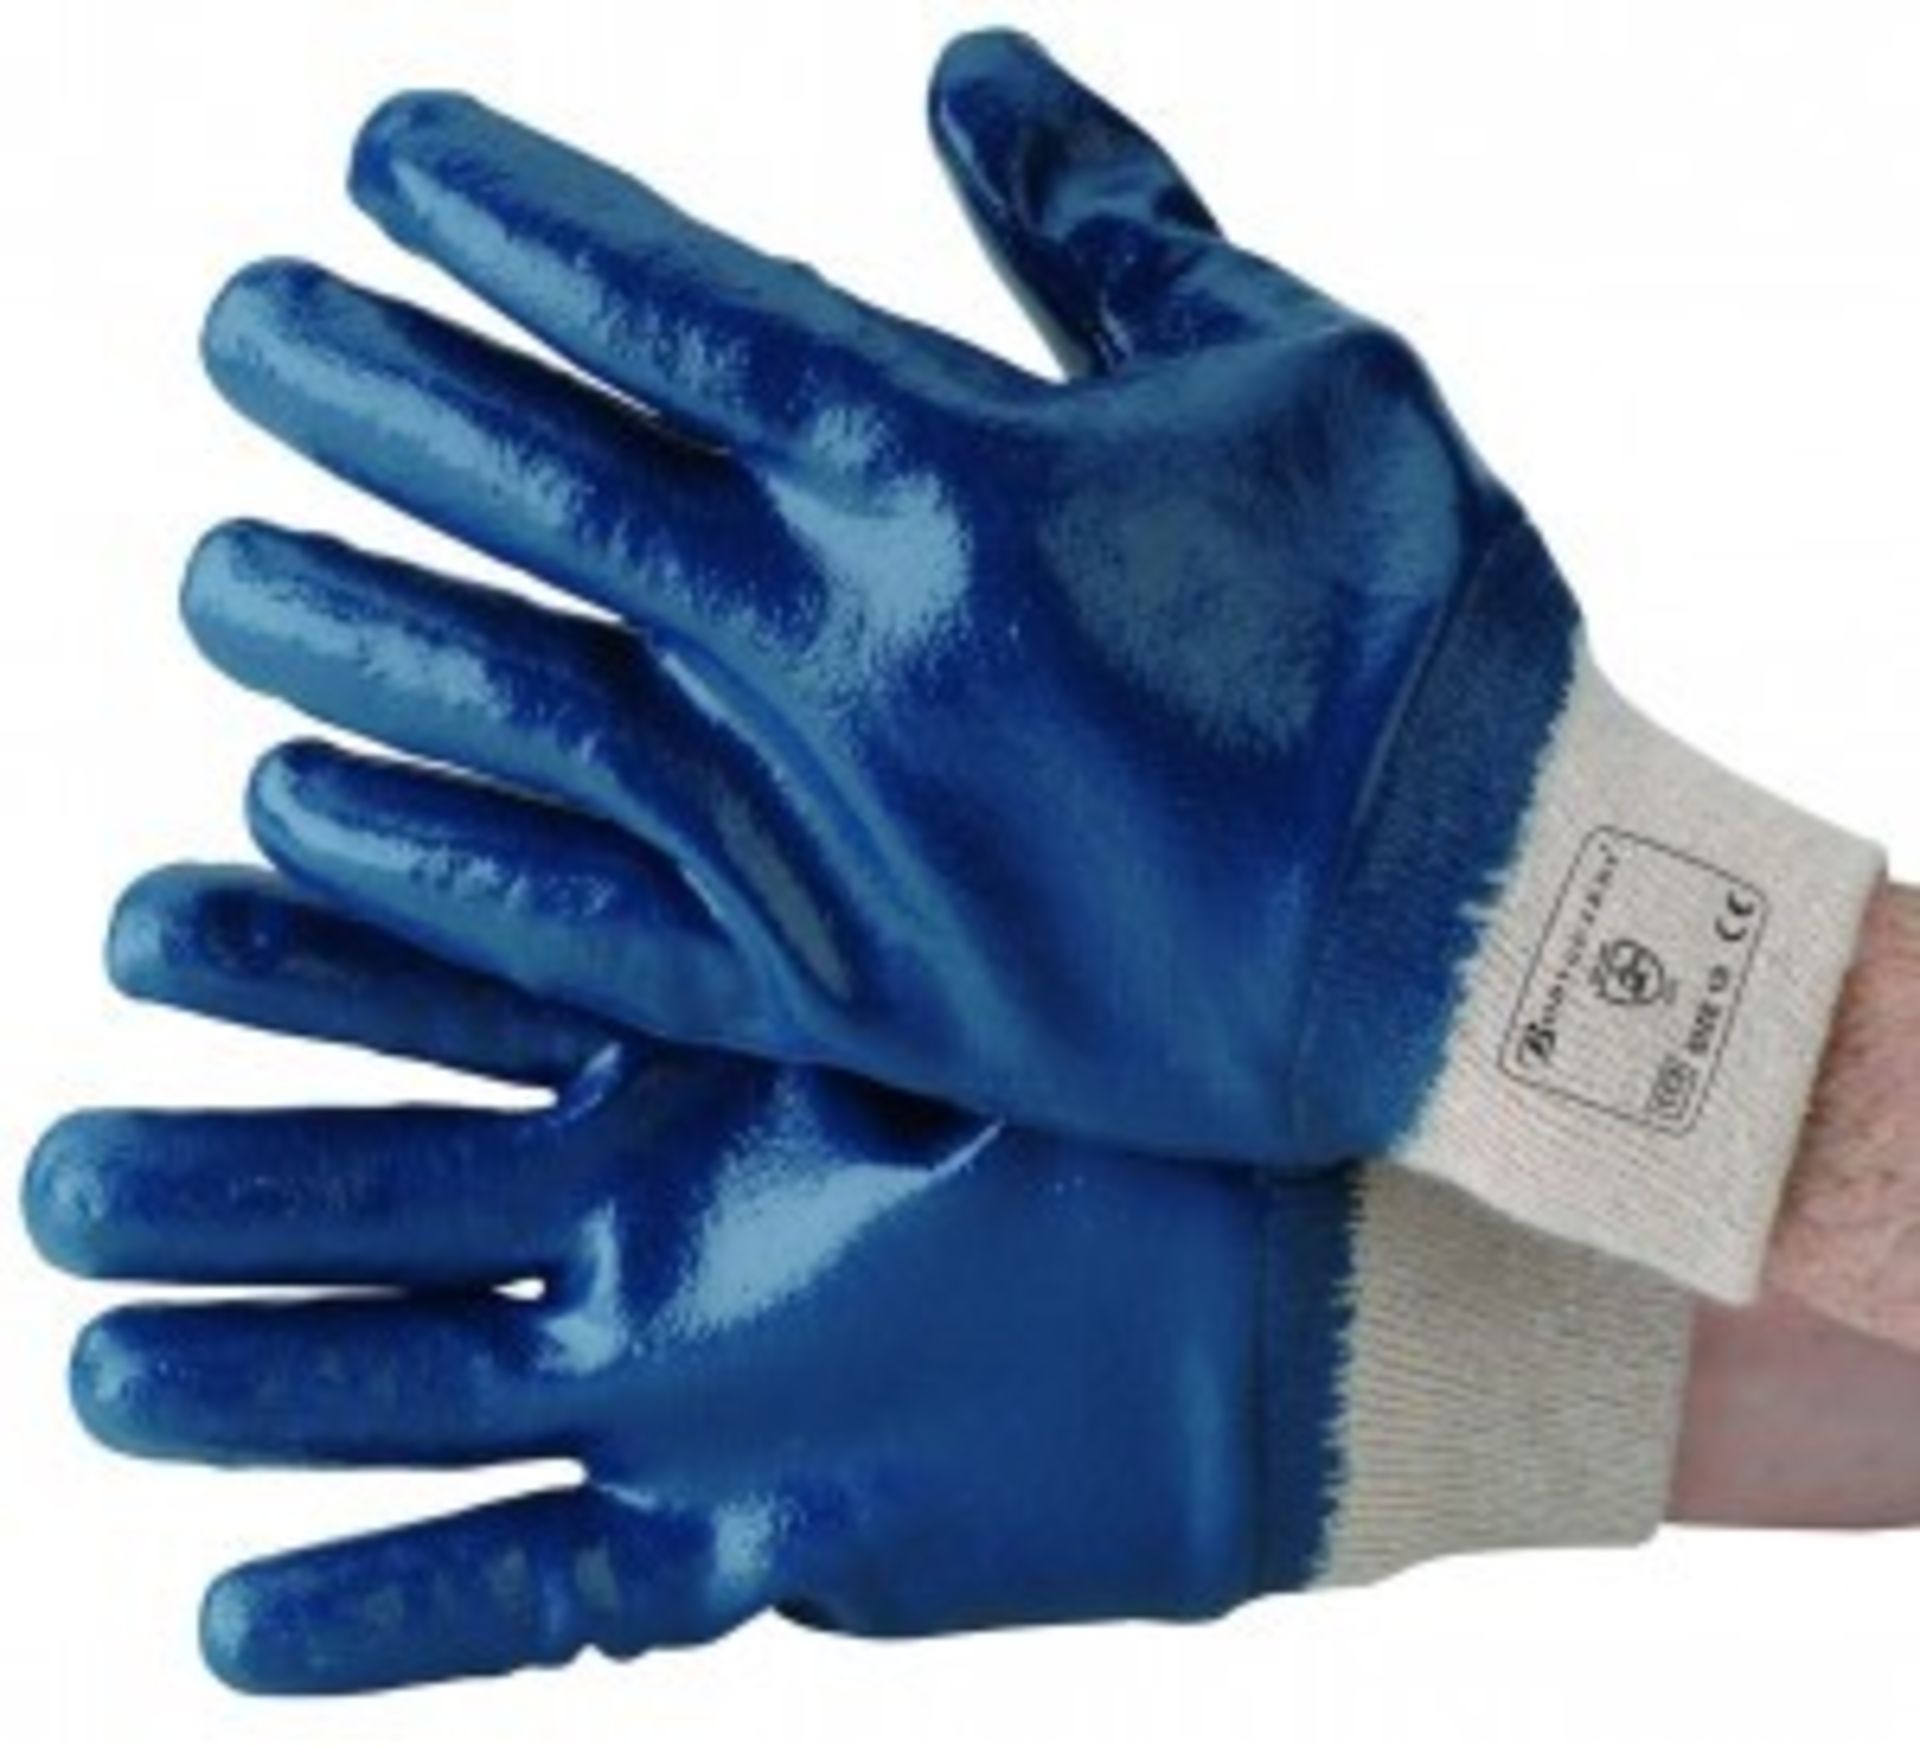 1 LOT TO CONTAIN 12 PAIRS OF POLYCO MATRIX BODYGUARD GLOVES GH113 - NAVY BLUE (P/N - 108) / RRP £